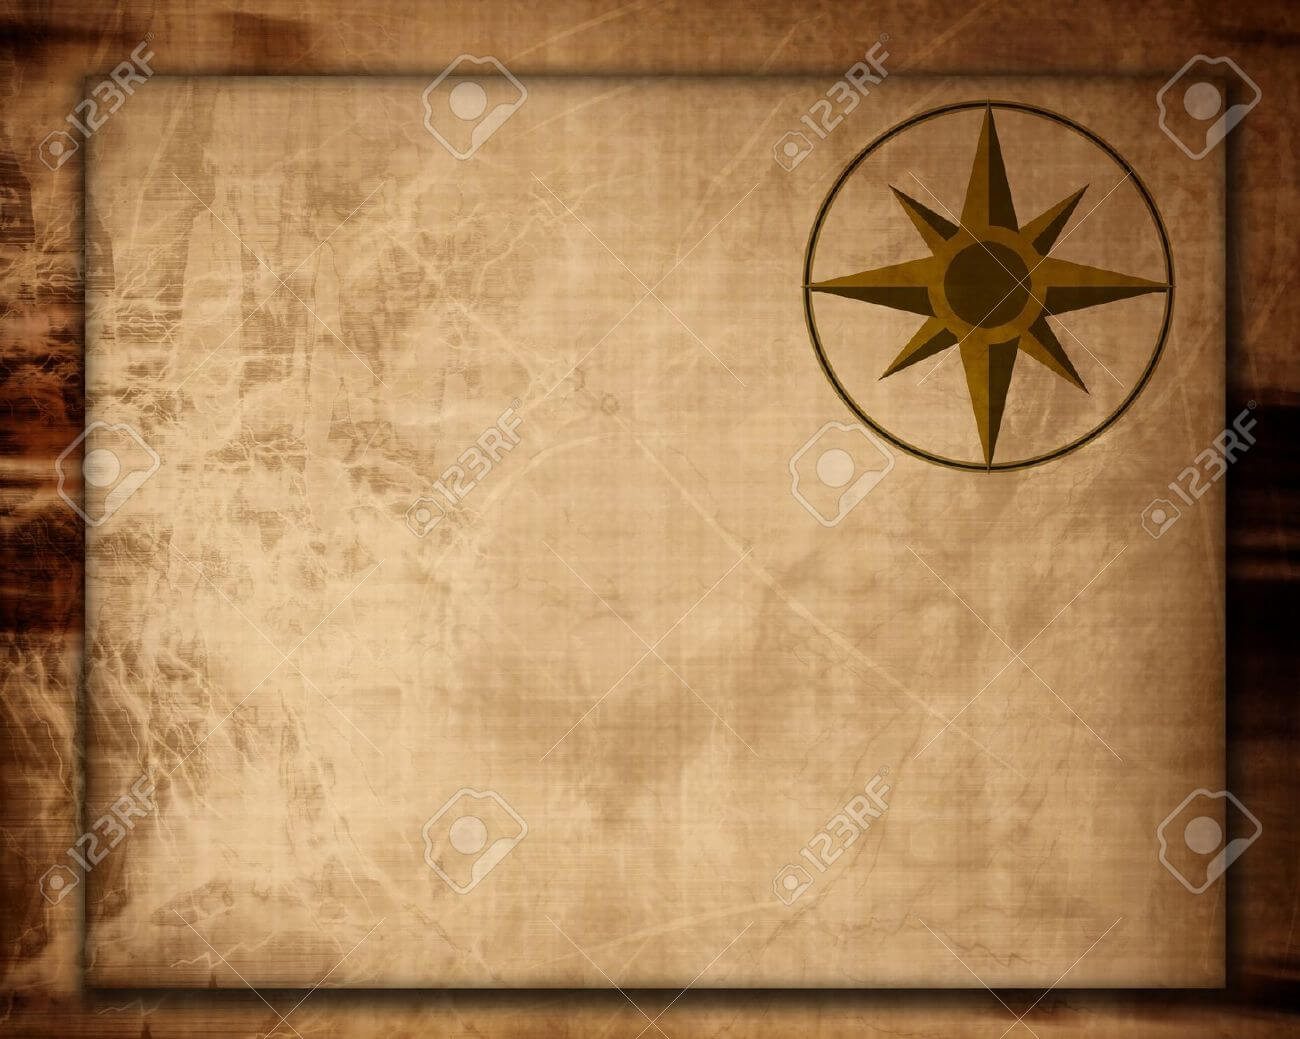 Blank Treasure Map Clipart For Blank Pirate Map Template